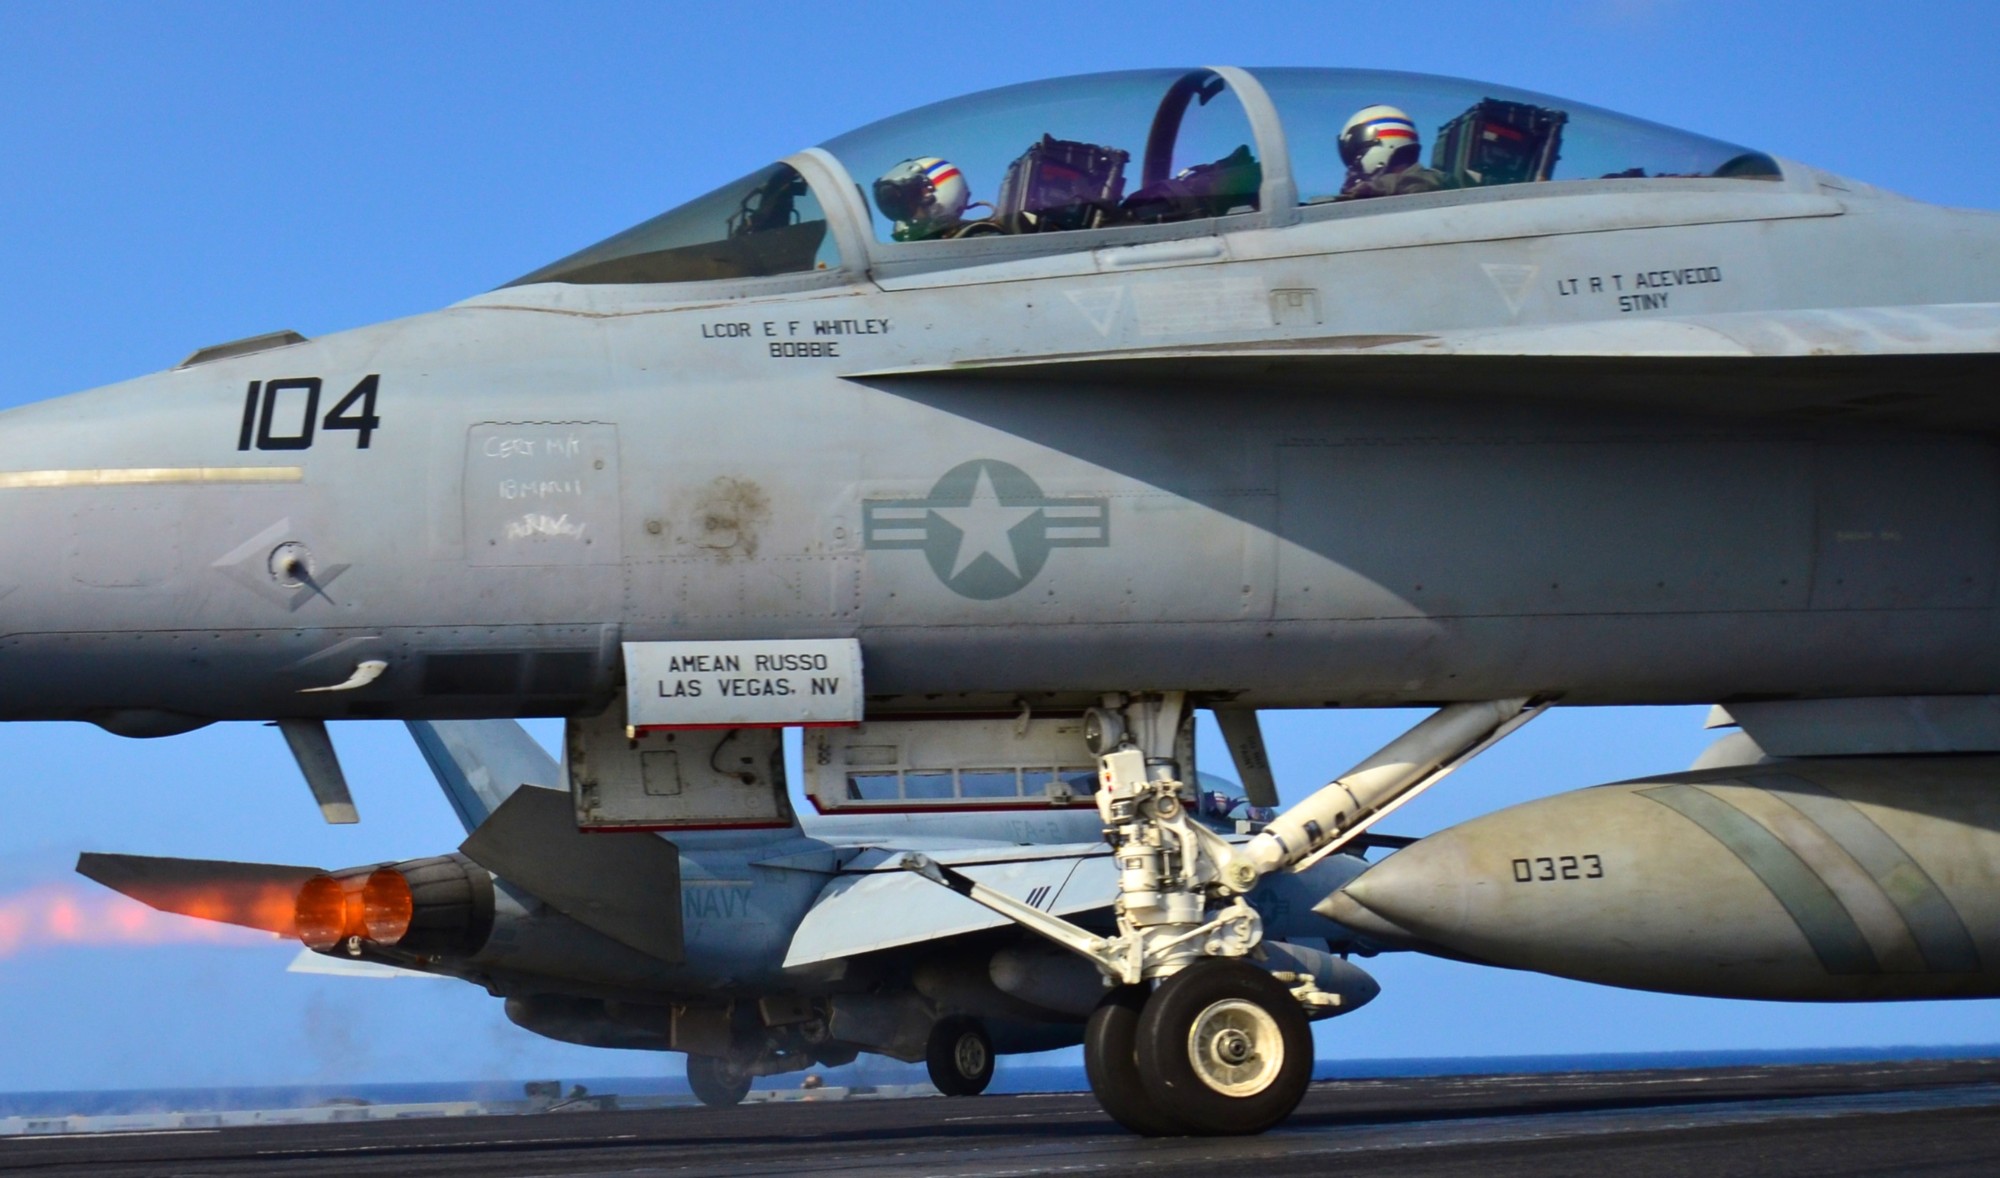 vfa-2 bounty hunters strike fighter squadron us navy f/a-18f super hornet carrier air wing cvw-2 uss abraham lincoln cvn-72 70